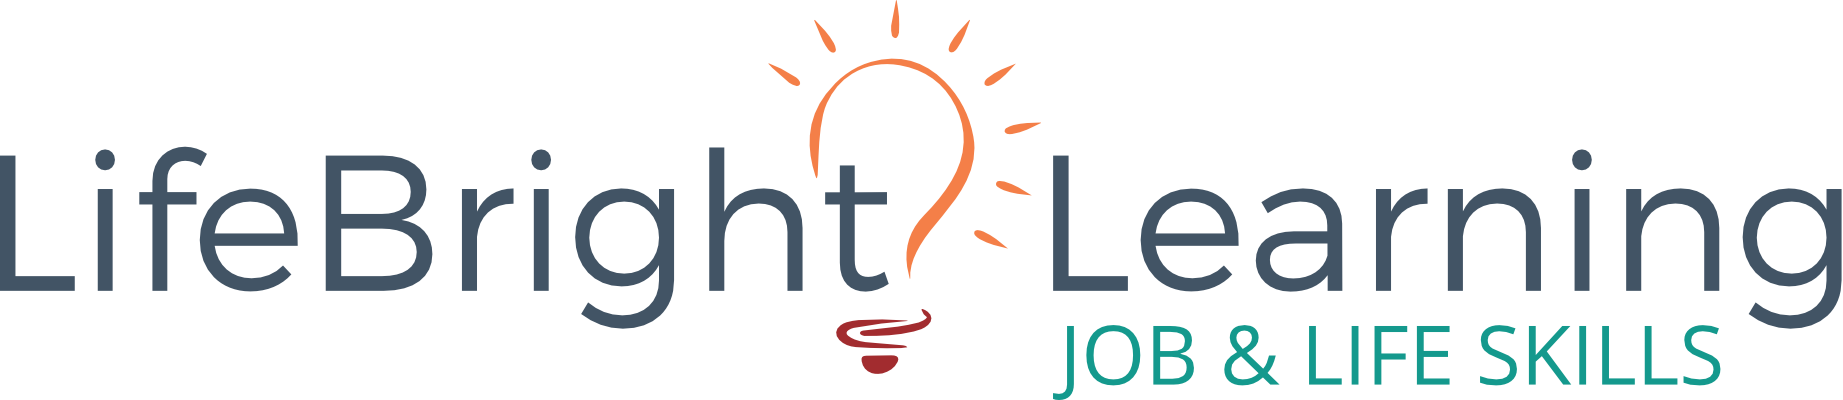 LifeBright Learning